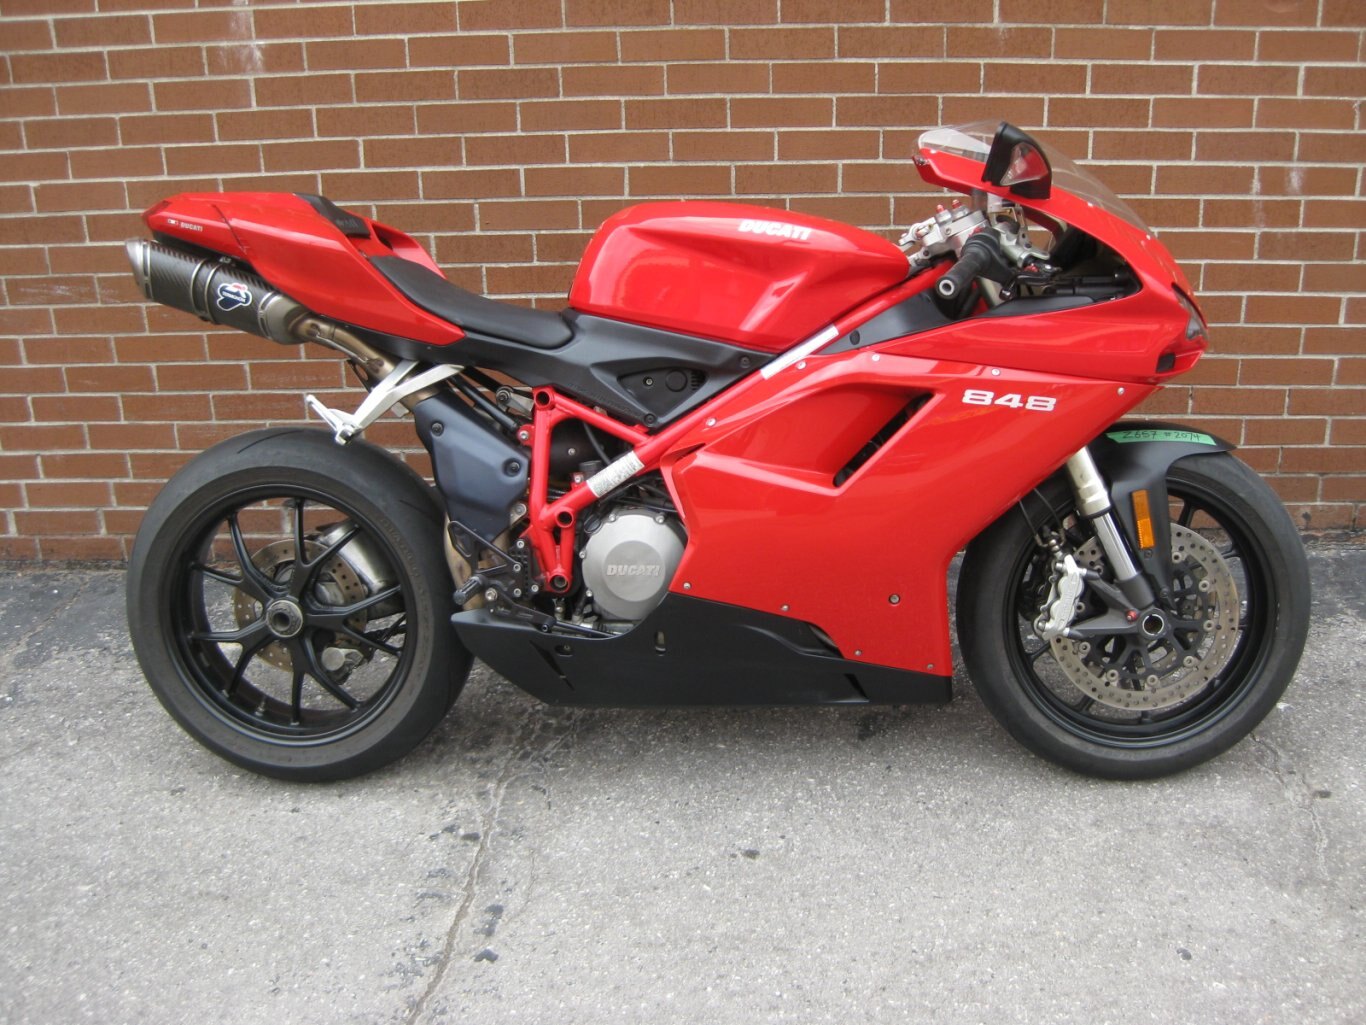 2010 Ducati 848-SOLD CONGRATULATIONS SANJAY-WELCOME TO THE WORLD OF TWO ITALIAN MOTORCYCLE EXCITEMENT-WITH THANKS FROM CHRIS AND THE ENTIRE CYCLE WORLD TEAM!!